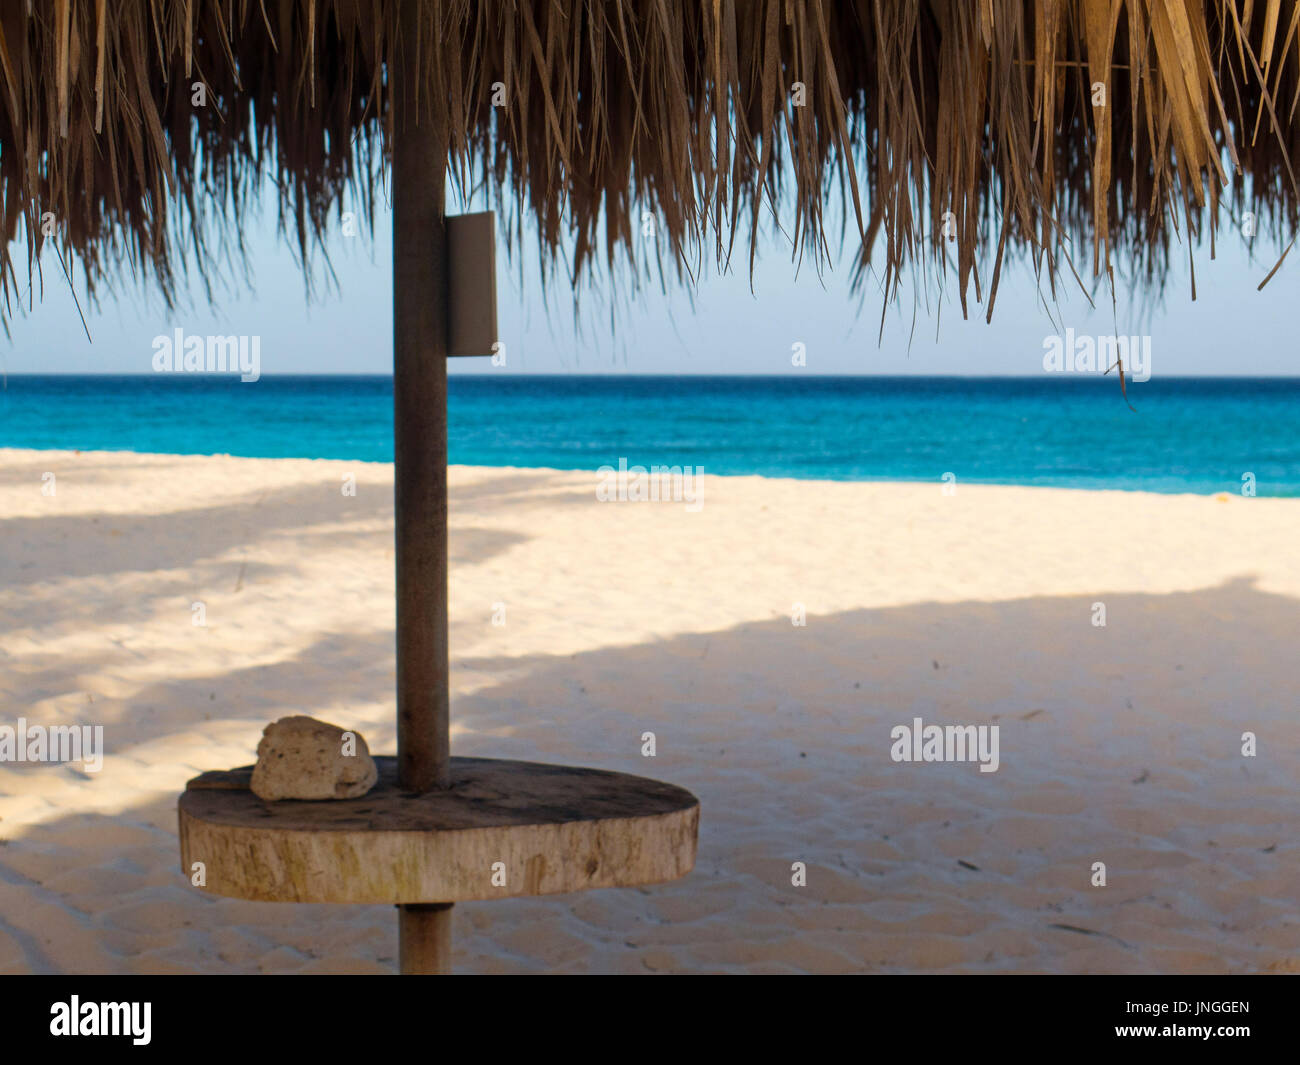 View from under Palapa on beach Stock Photo